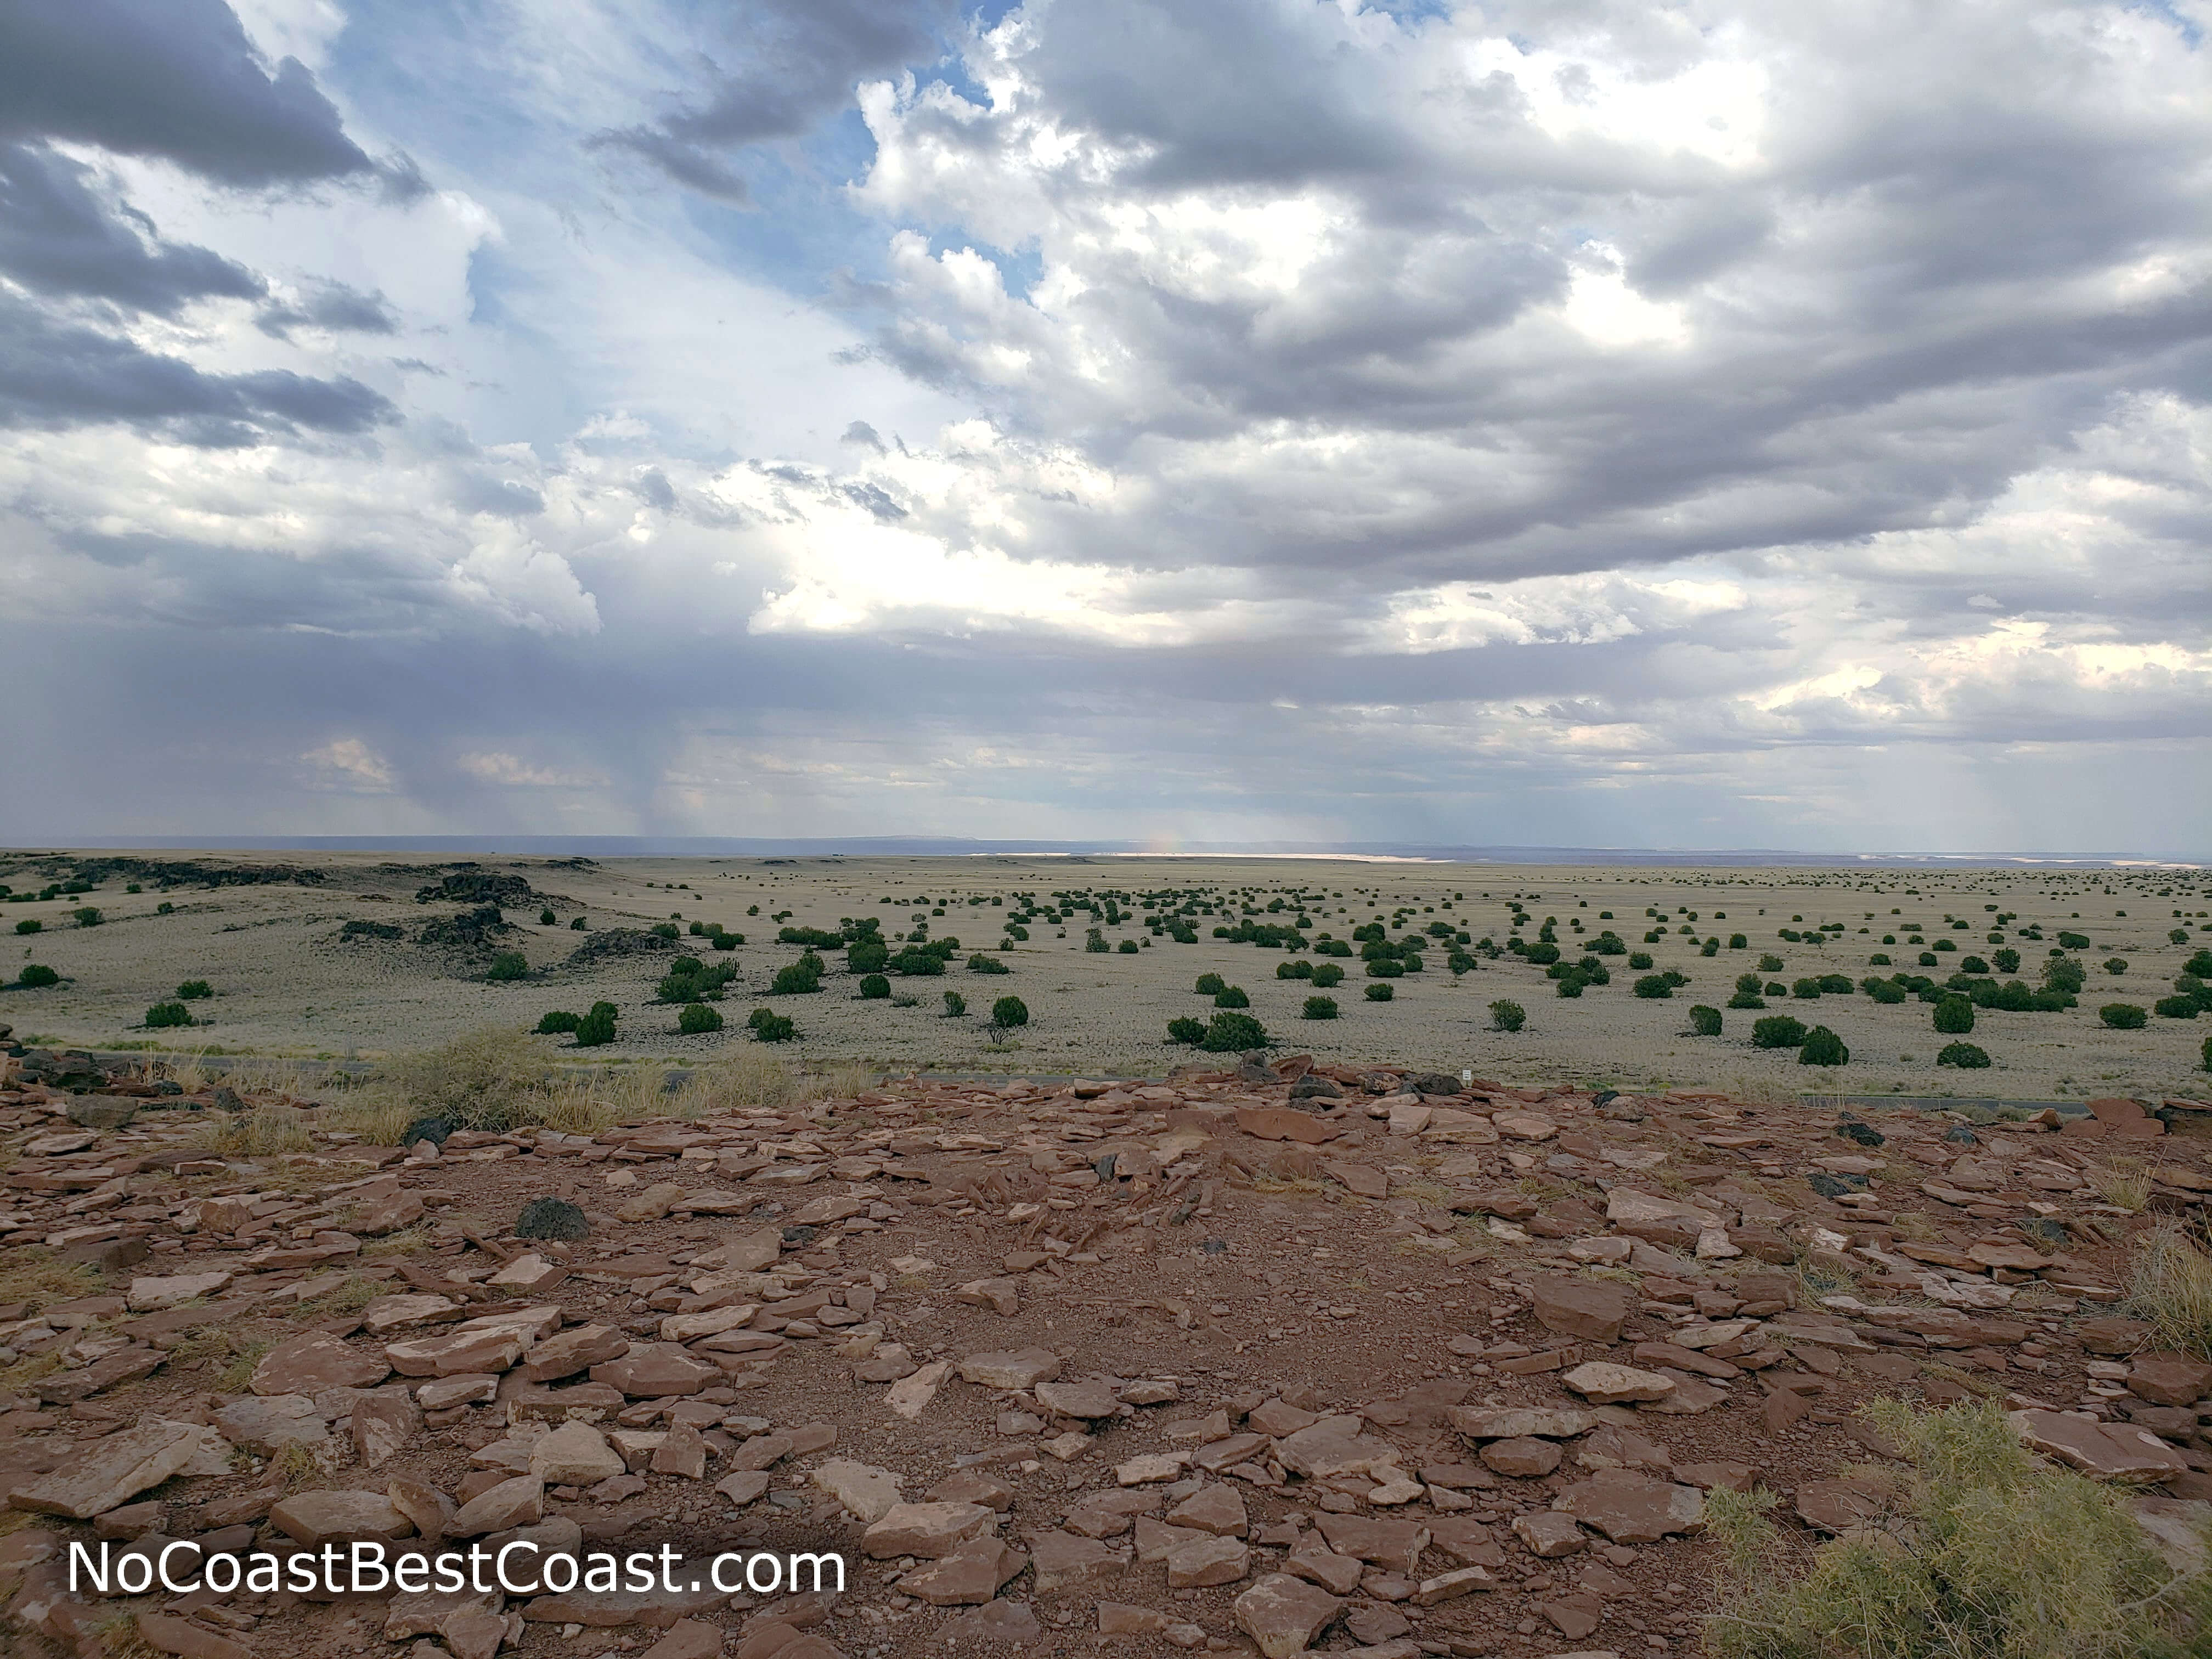 This view across the flat desert plateau helped residents spot invaders